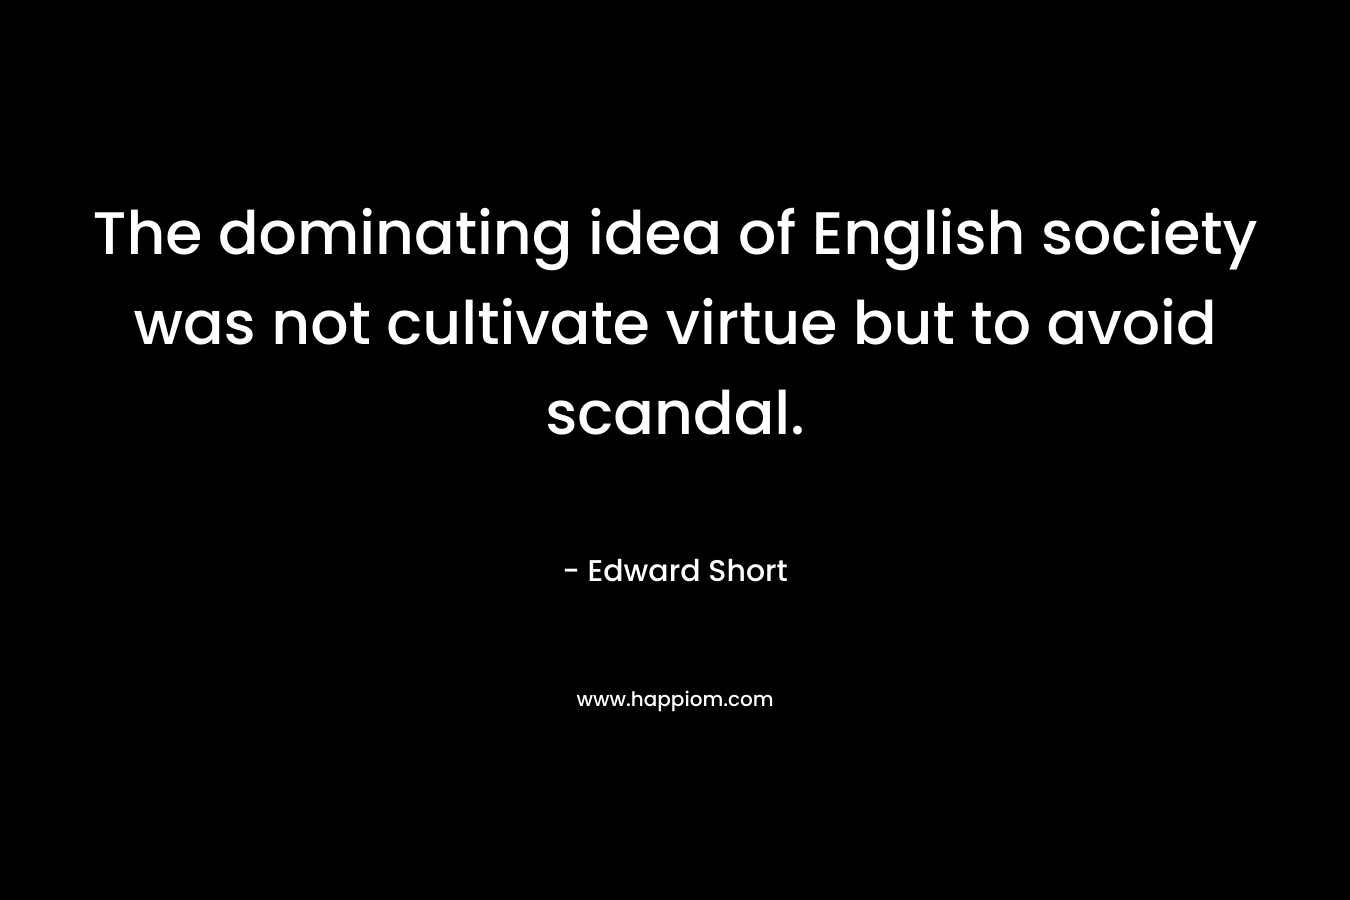 The dominating idea of English society was not cultivate virtue but to avoid scandal. – Edward Short